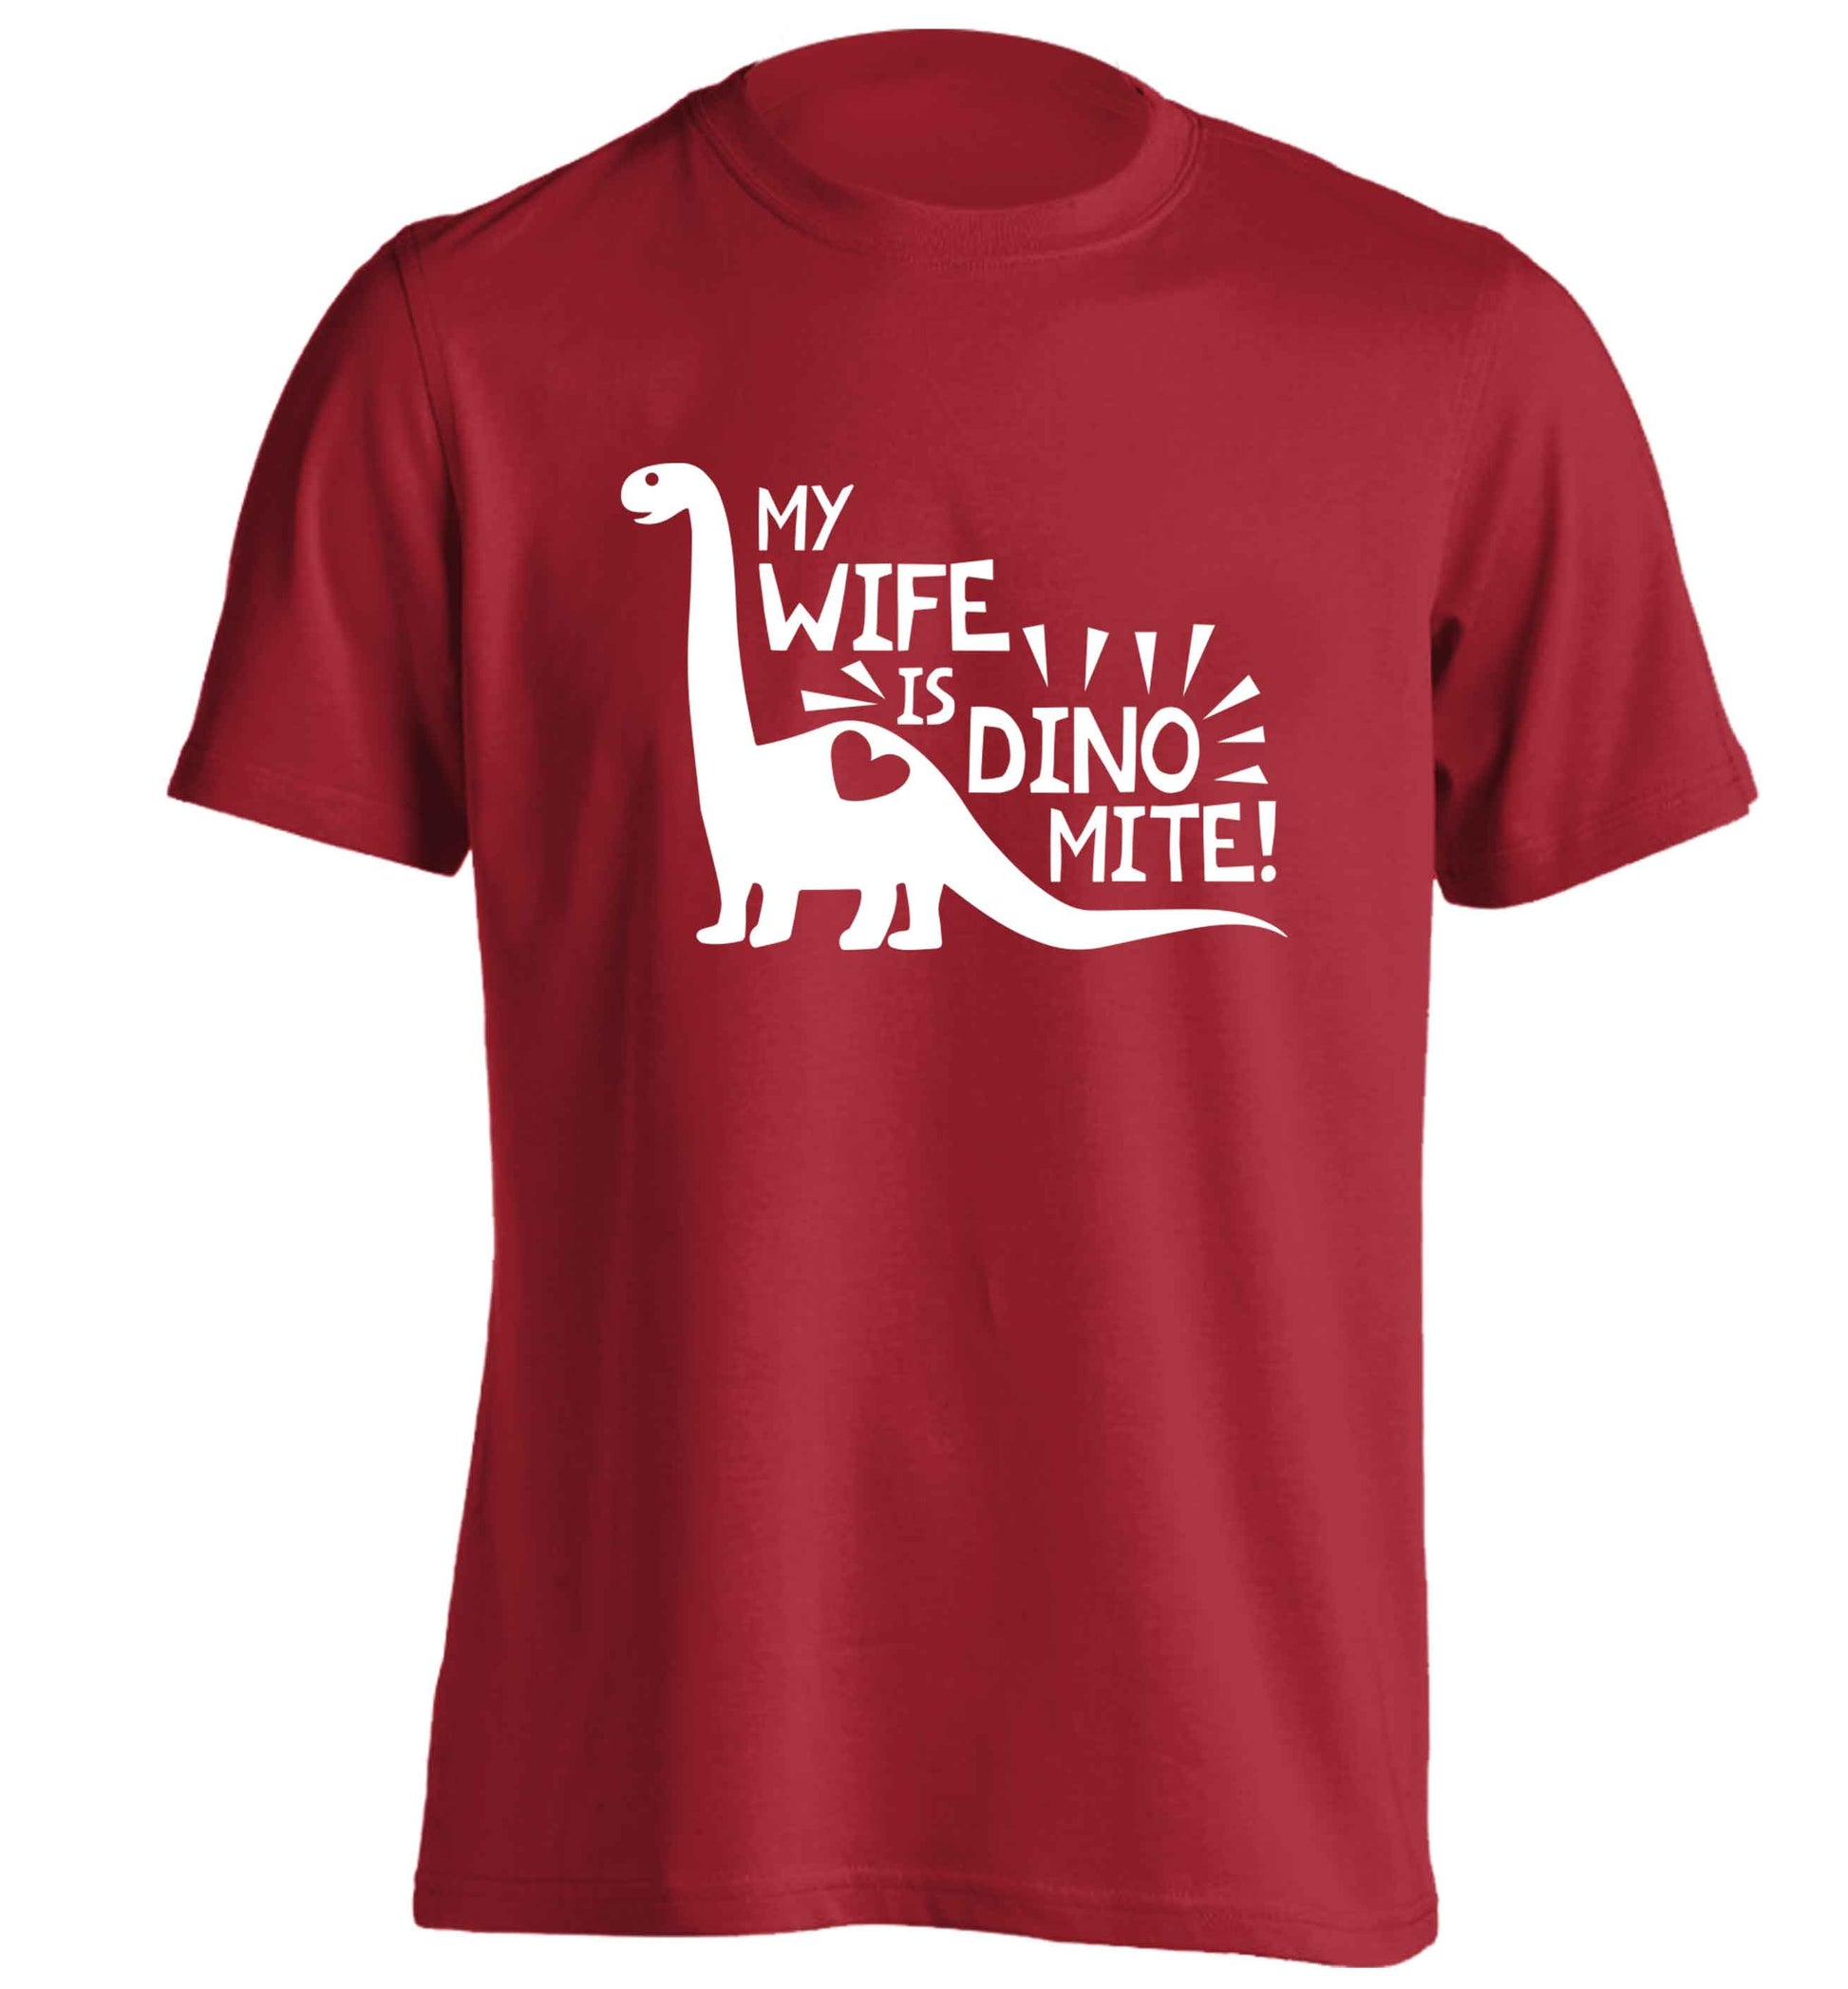 My wife is dinomite! adults unisex red Tshirt 2XL